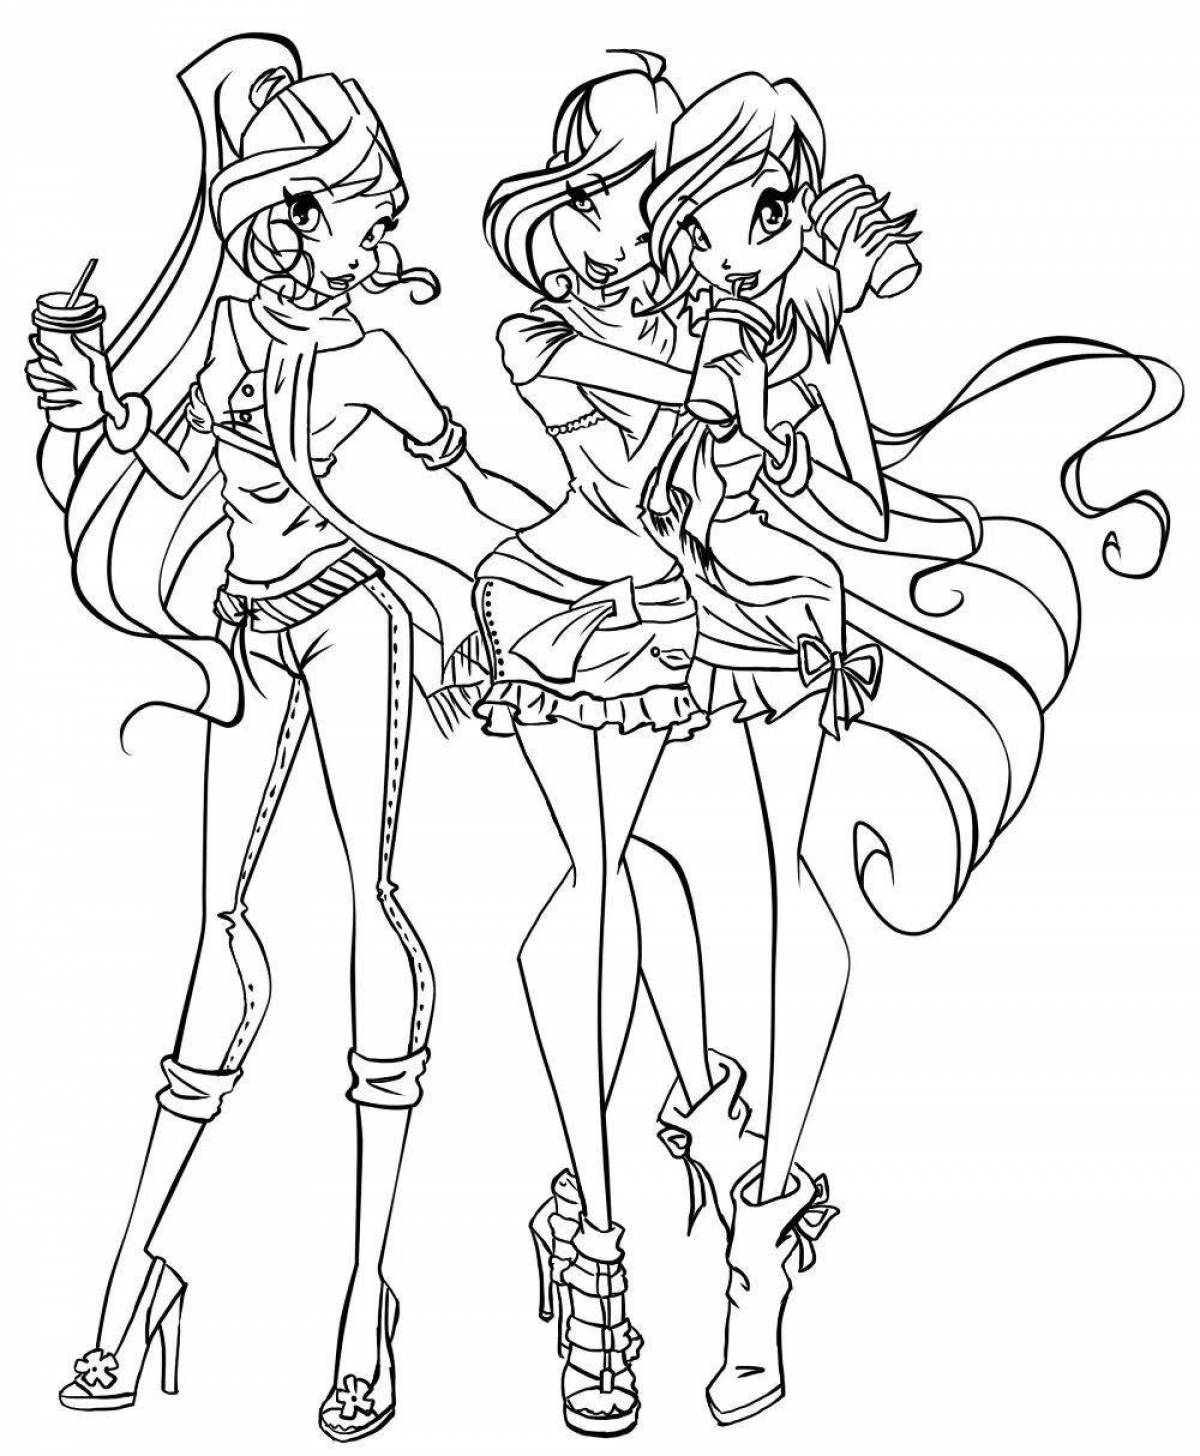 Playful club coloring page